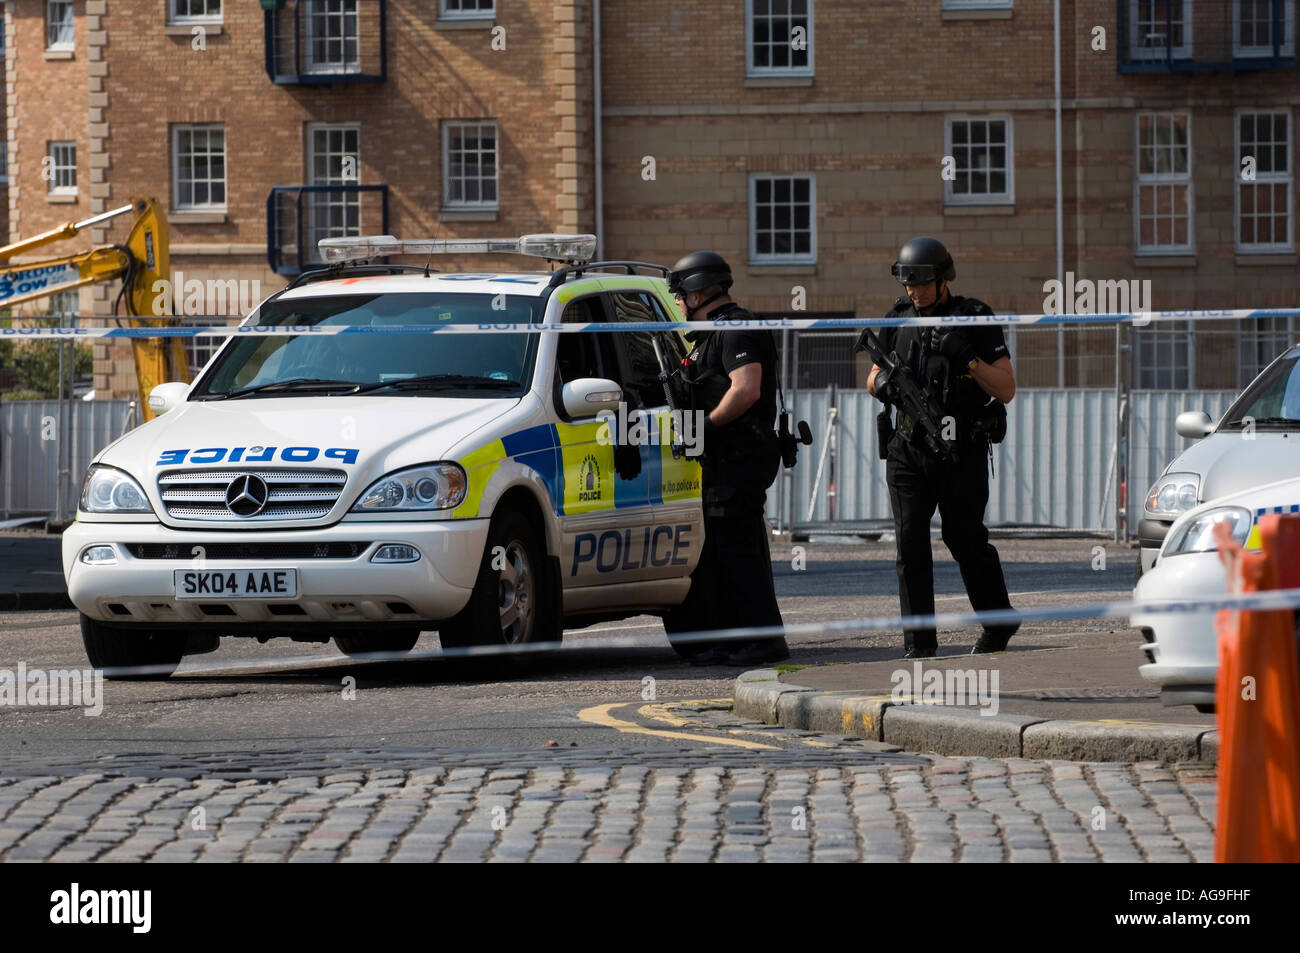 Armed policemen at incident scene in residential area Stock Photo